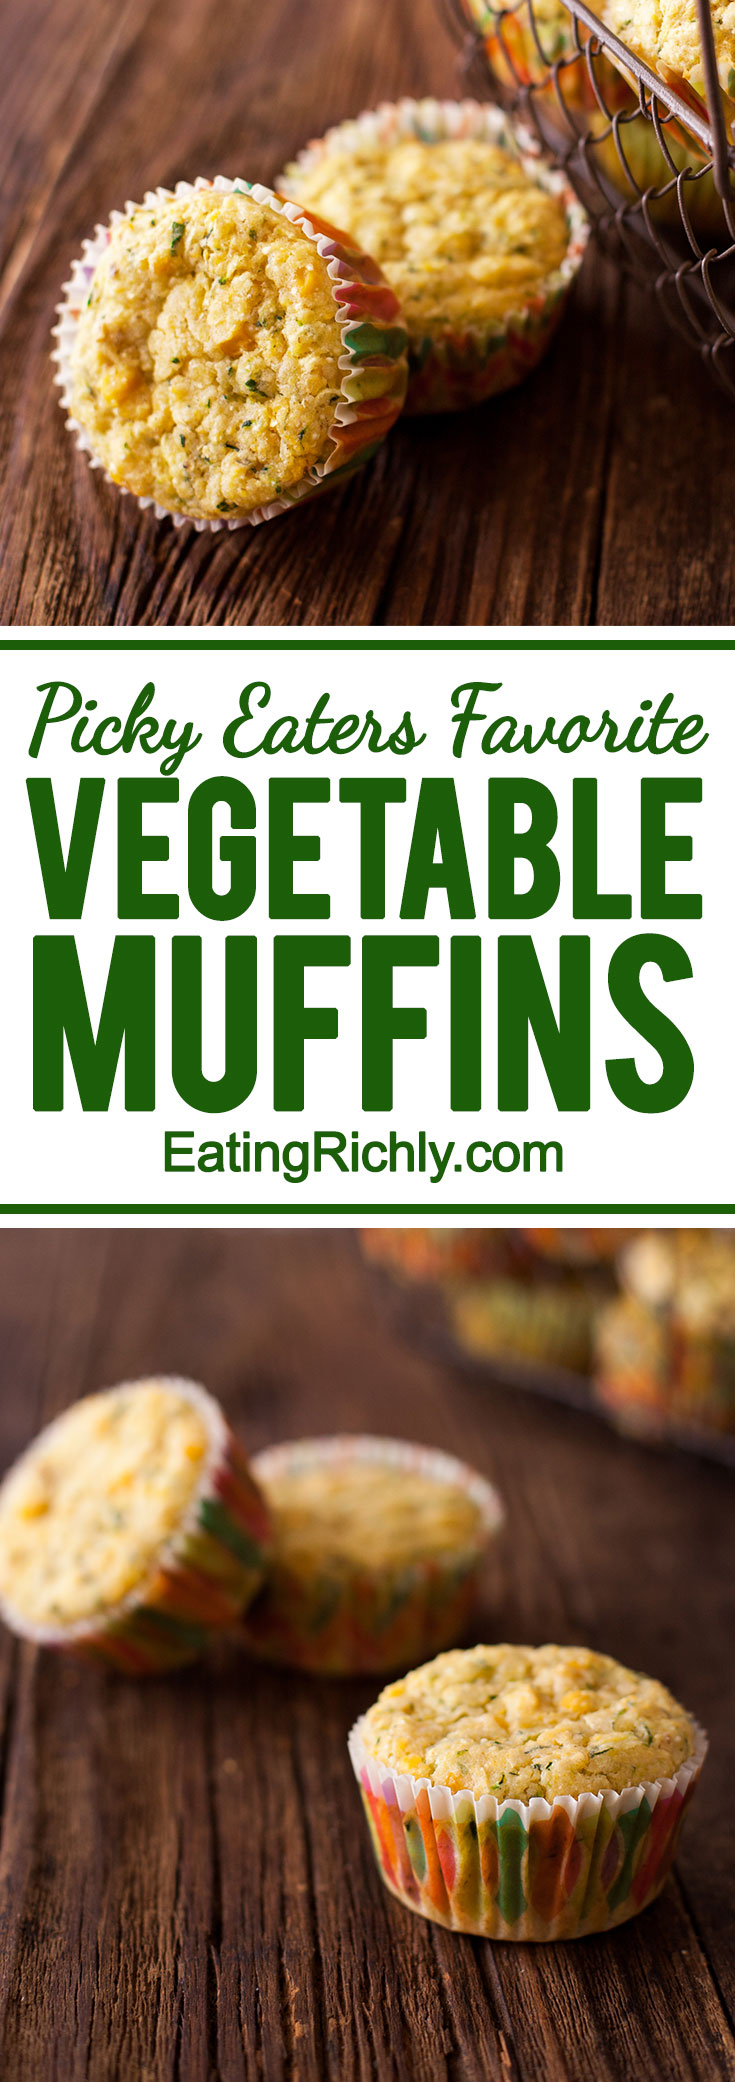 These healthy vegetable muffins are packed with zucchini, corn, and whole grains. And picky eaters LOVE them! From EatingRichly.com